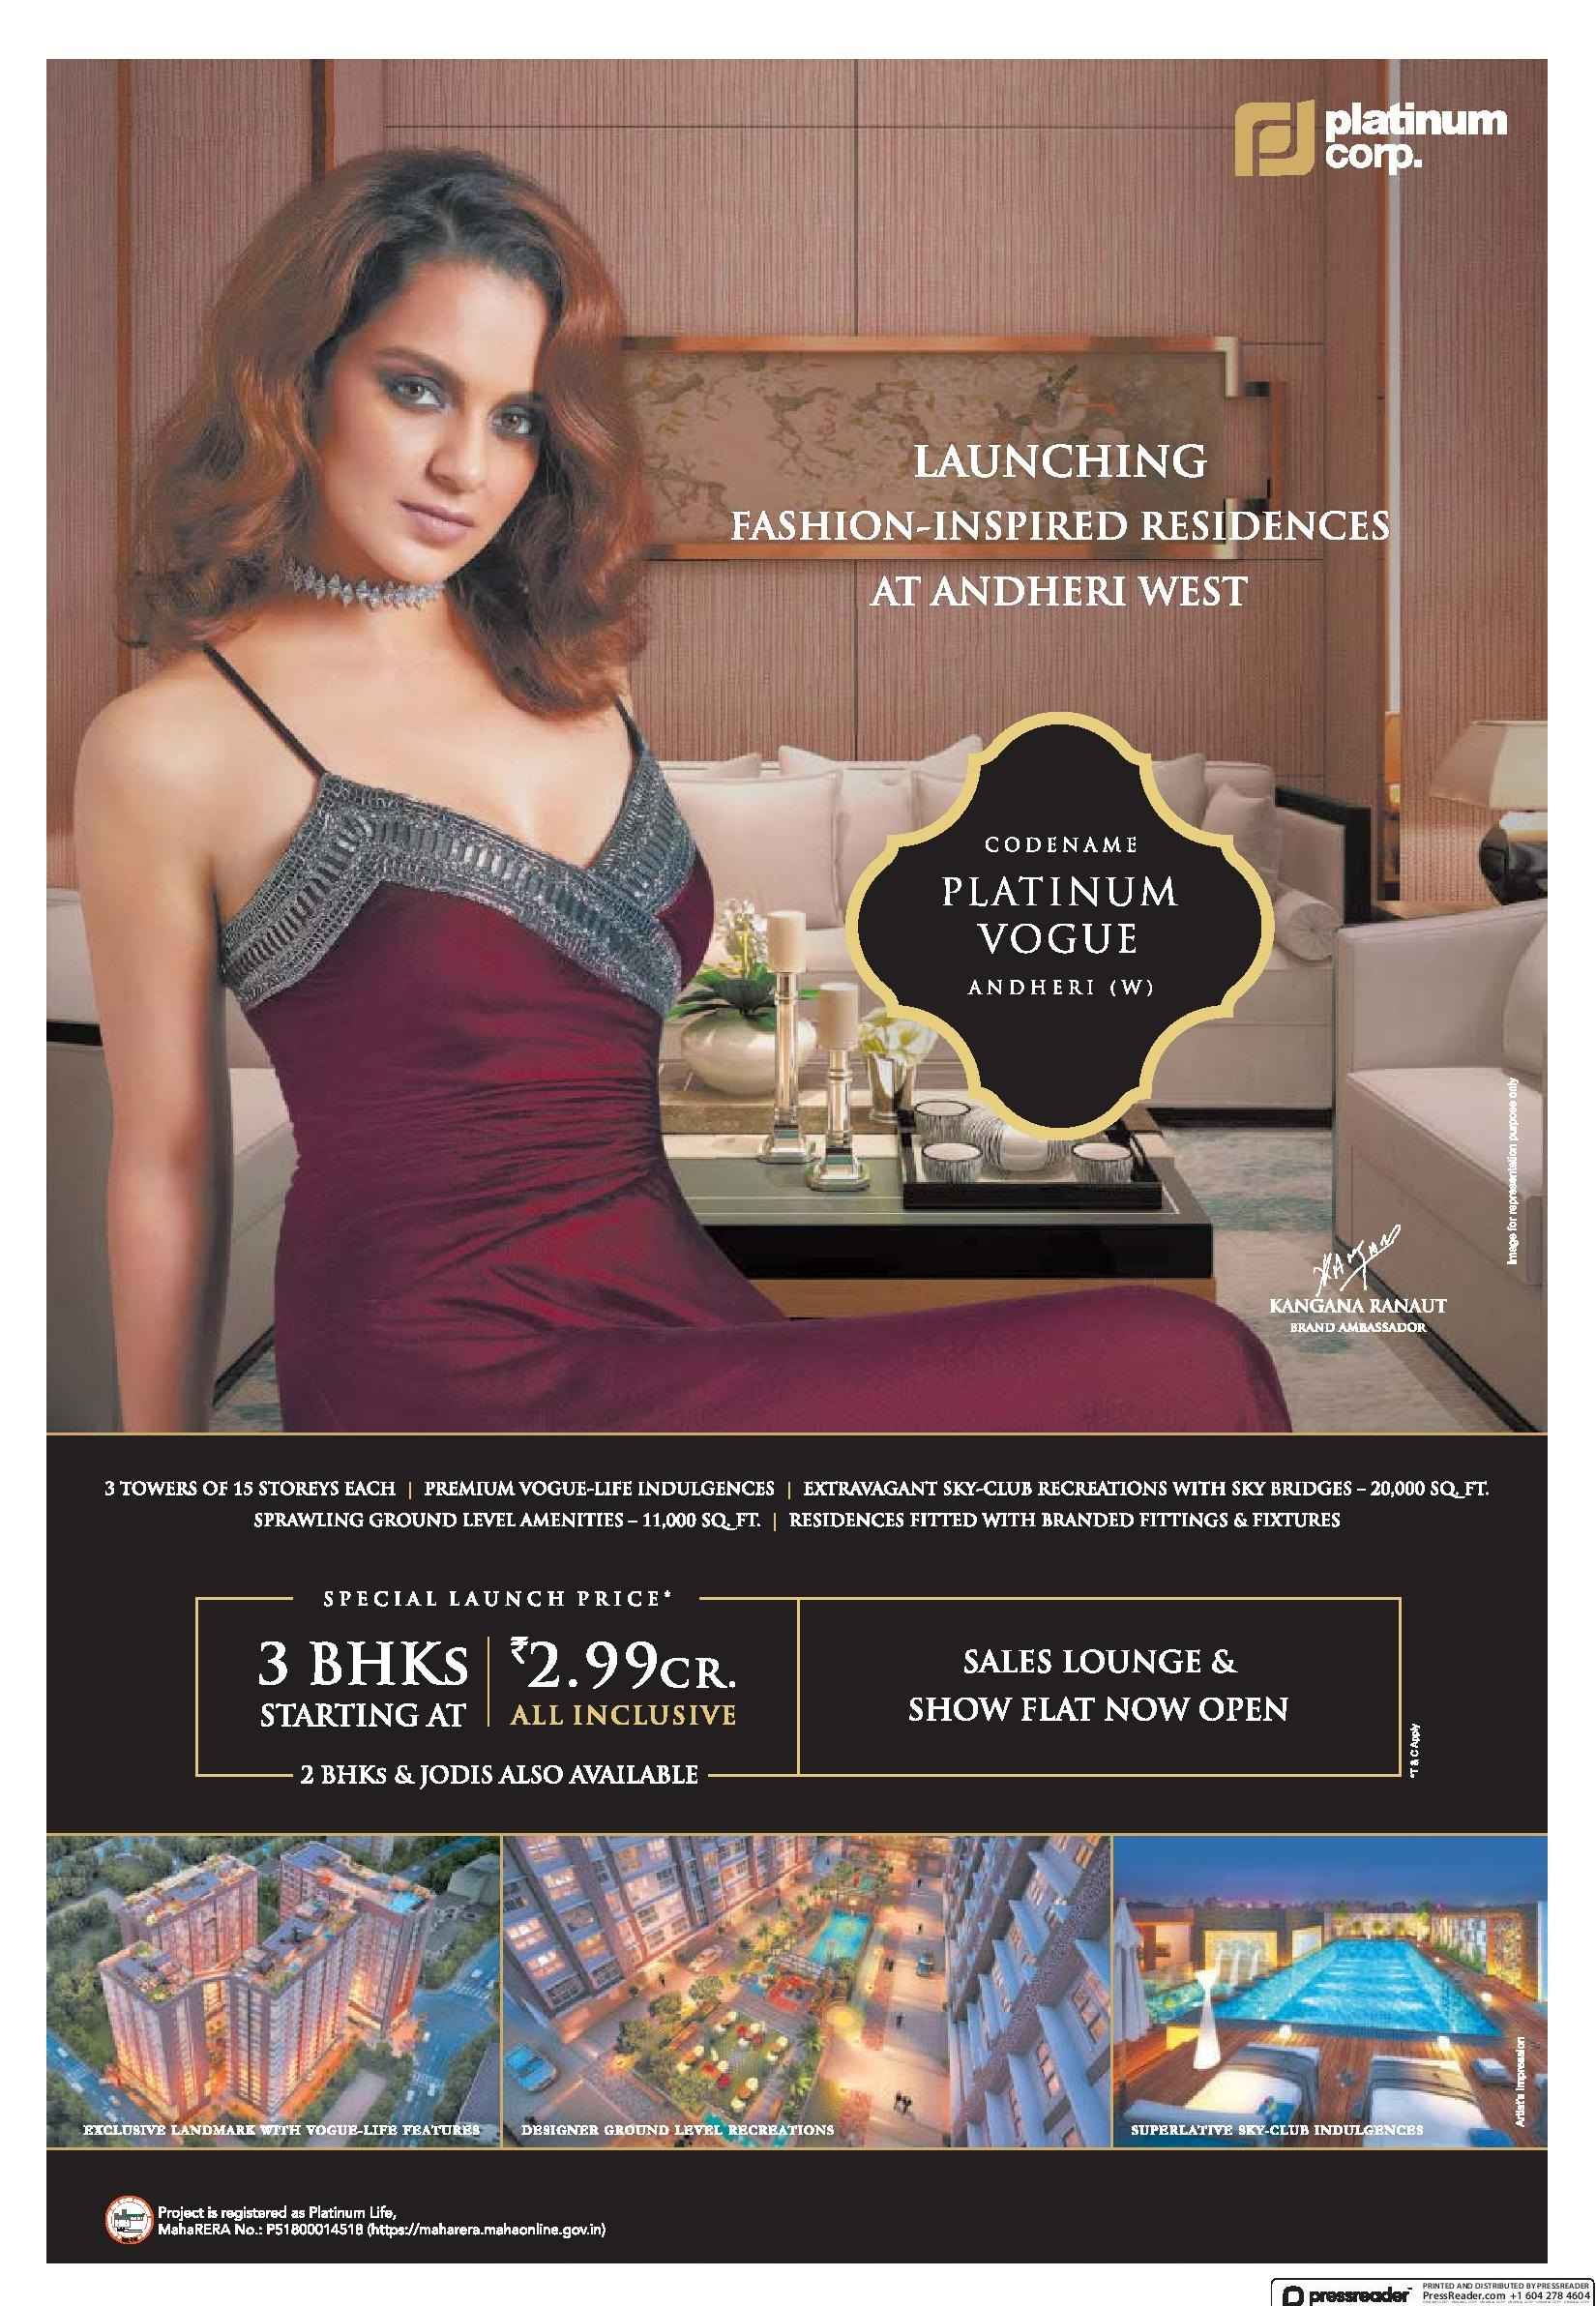 Sales lounge & show flat now open at Platinum Vogue in Andheri West, Mumbai Update